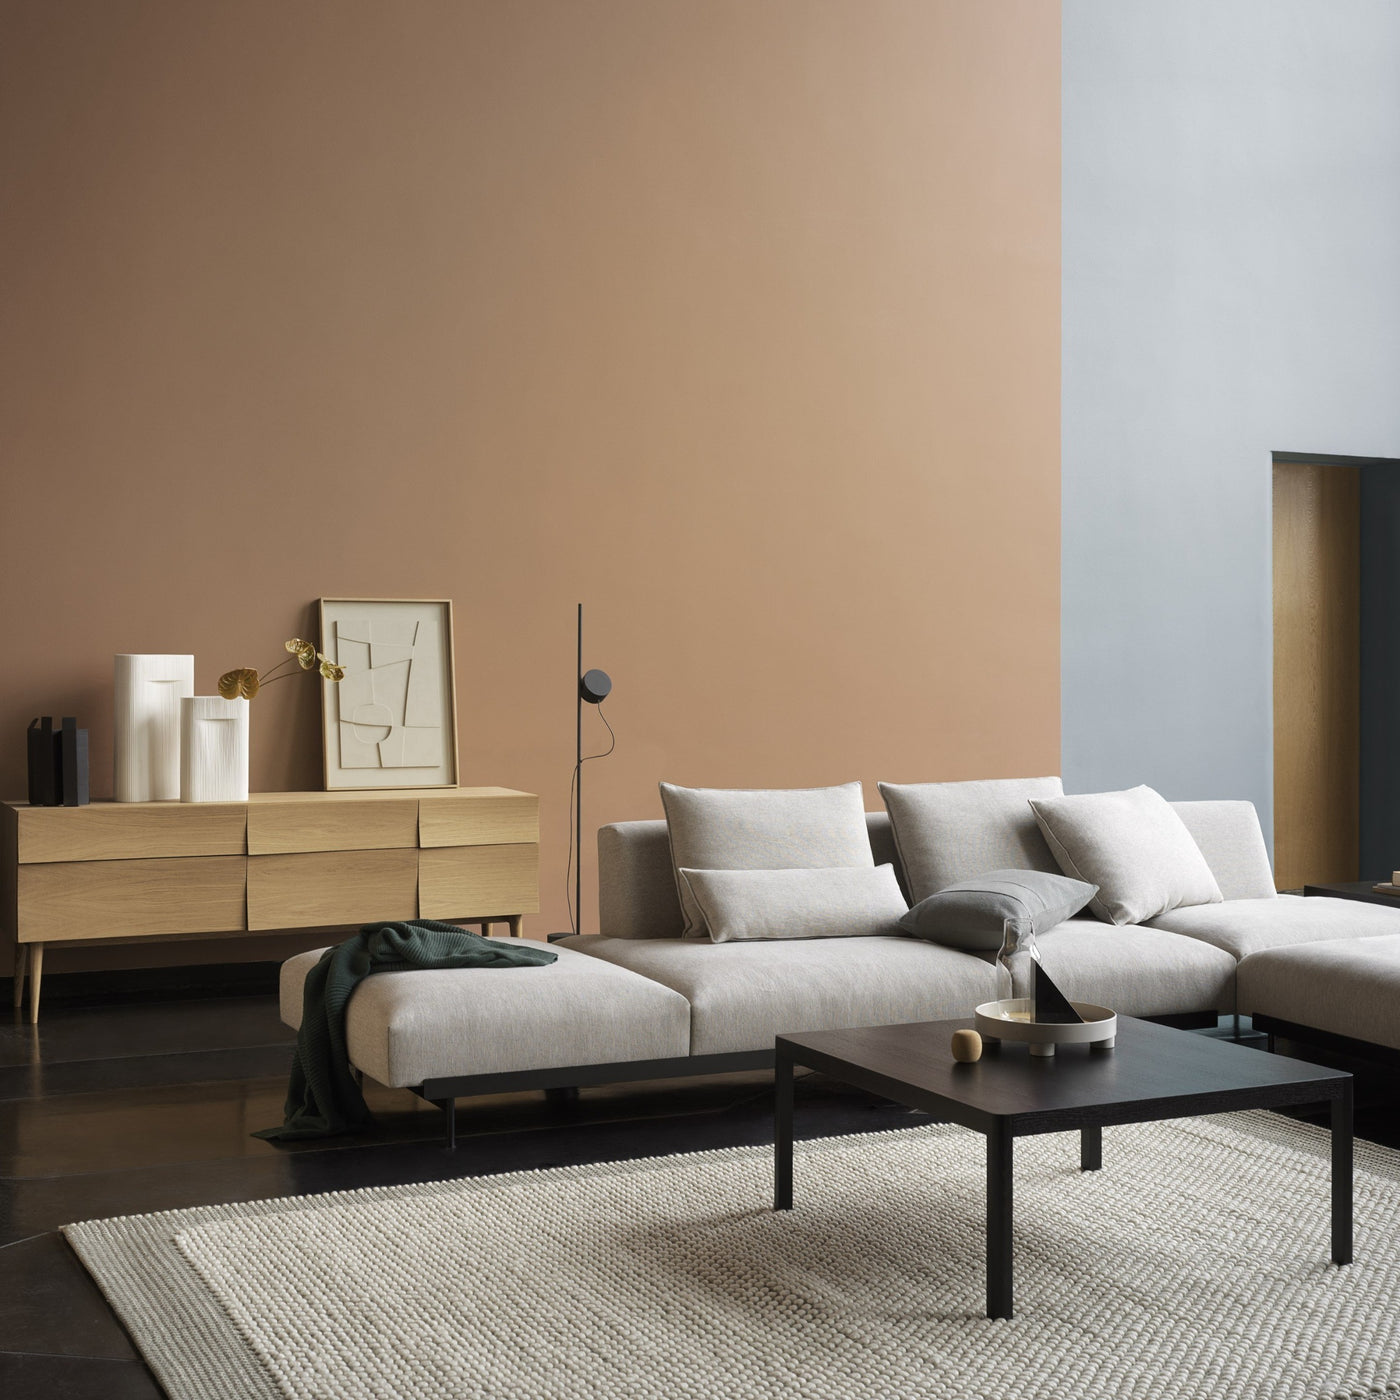 Muuto In Situ Corner sofa configuration 9 in clay 12 fabric. Made to order from someday designs . #colour_clay-12